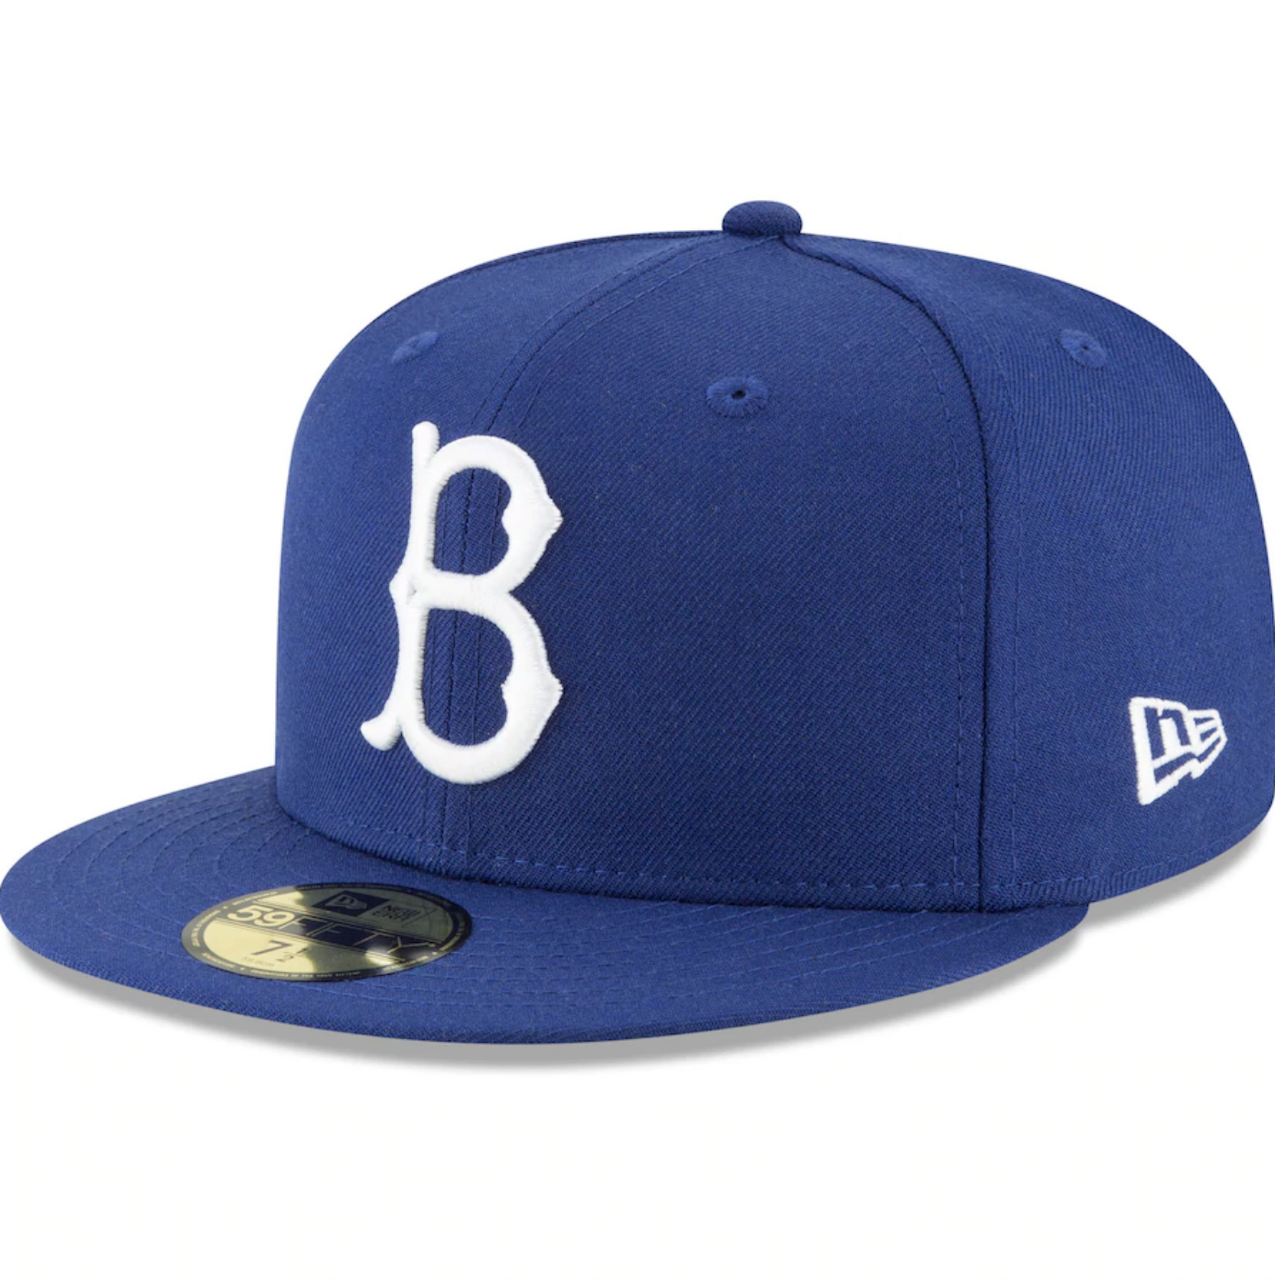 7 1/2 Hat Club Brooklyn Dodgers 4/20 Pack Blue Red 59fifty